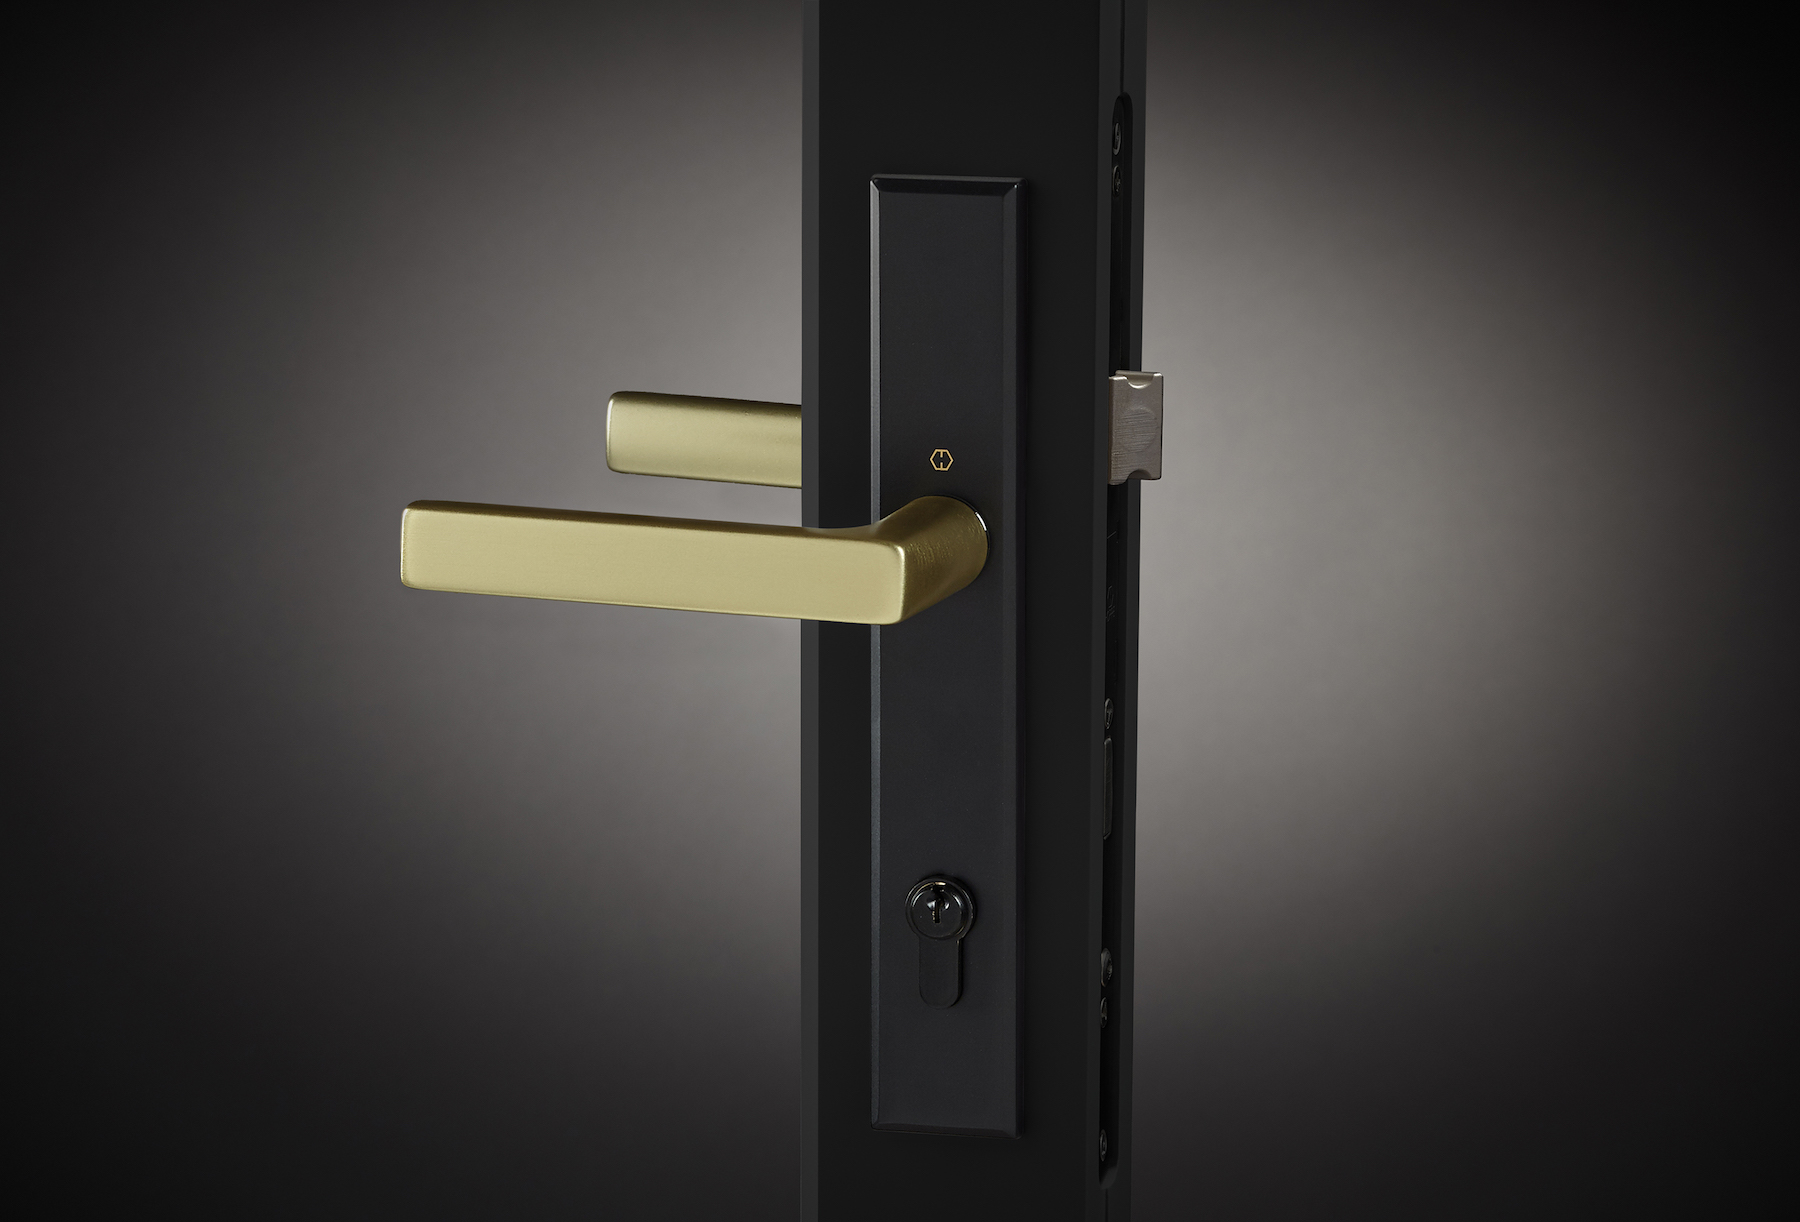 To complement its VistaLuxe collection, Kolbe Windows & Doors launched the two-tone Dallas handleset (shown) for in-swing entrance doors. The Brushed Gold lever complements a Matte Black key cylinder, turn knob, and escutcheon. Kolbe also unveiled the Ashlar crank-out handle for casements and awnings, in Matte Black, Rustic Umber, Satin Nickel, and White finishes.